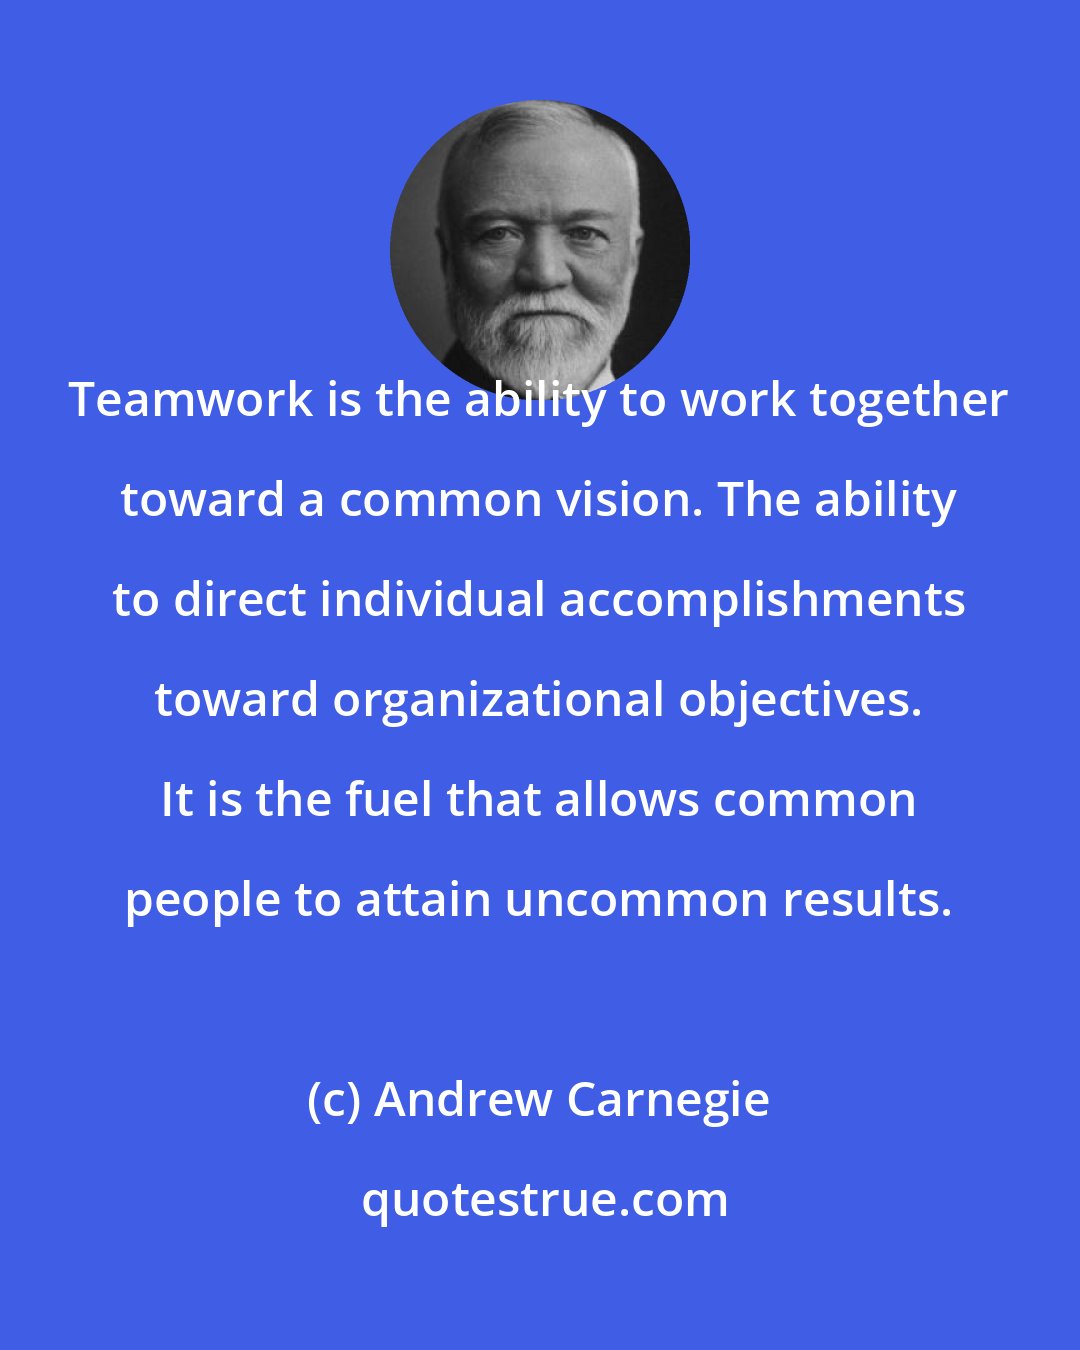 Andrew Carnegie: Teamwork is the ability to work together toward a common vision. The ability to direct individual accomplishments toward organizational objectives. It is the fuel that allows common people to attain uncommon results.